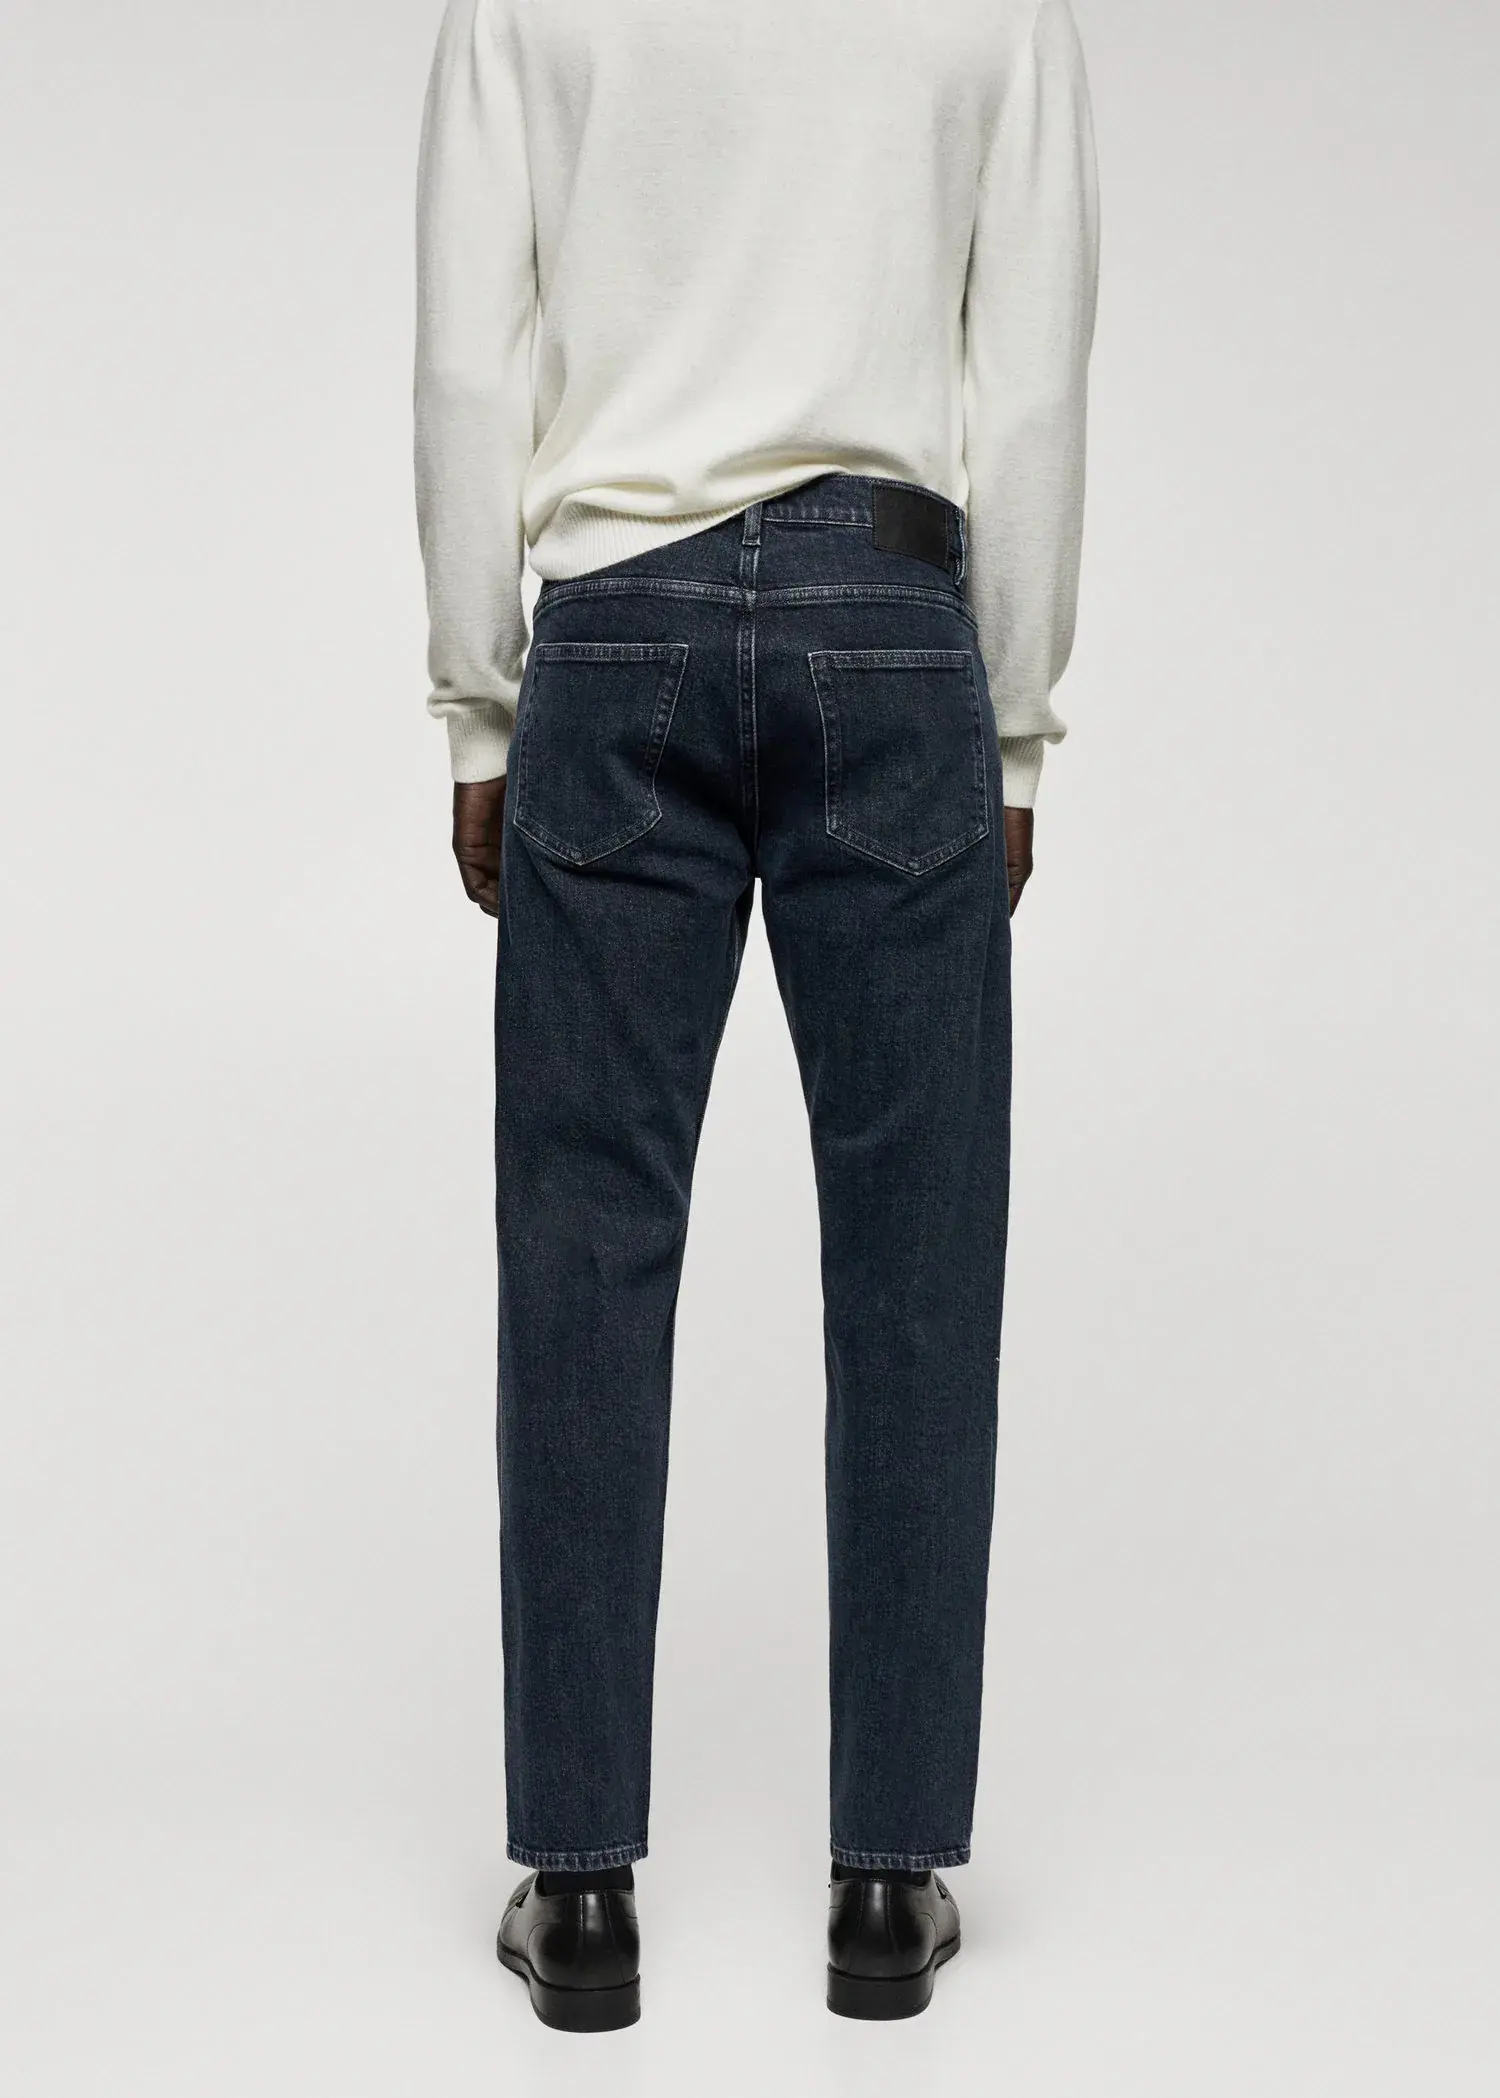 Mango Ben tapered cropped jeans. 3